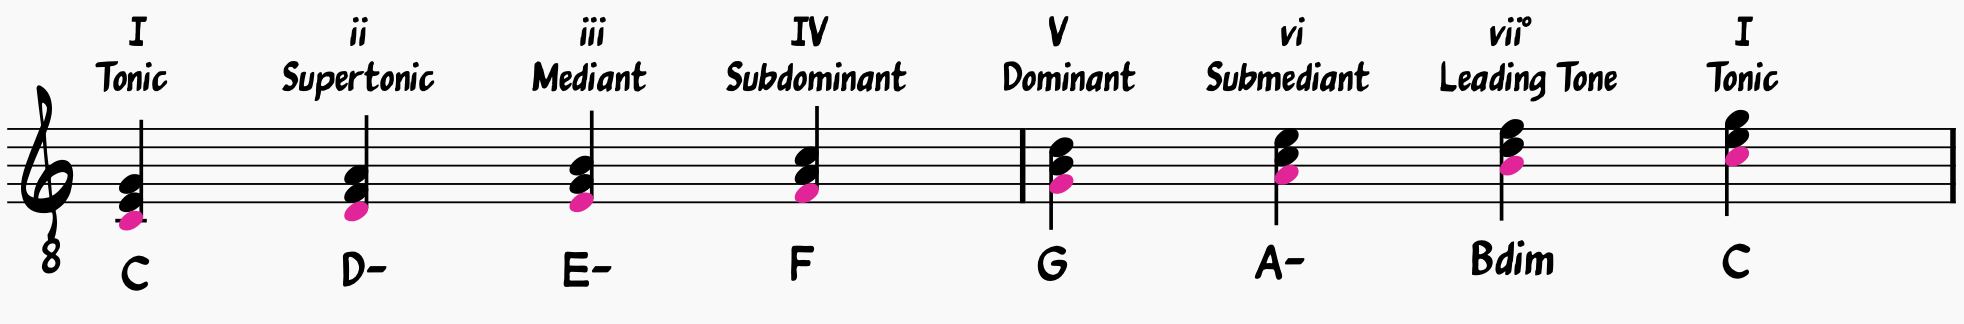 Diatonic major and minor chords in the key of C